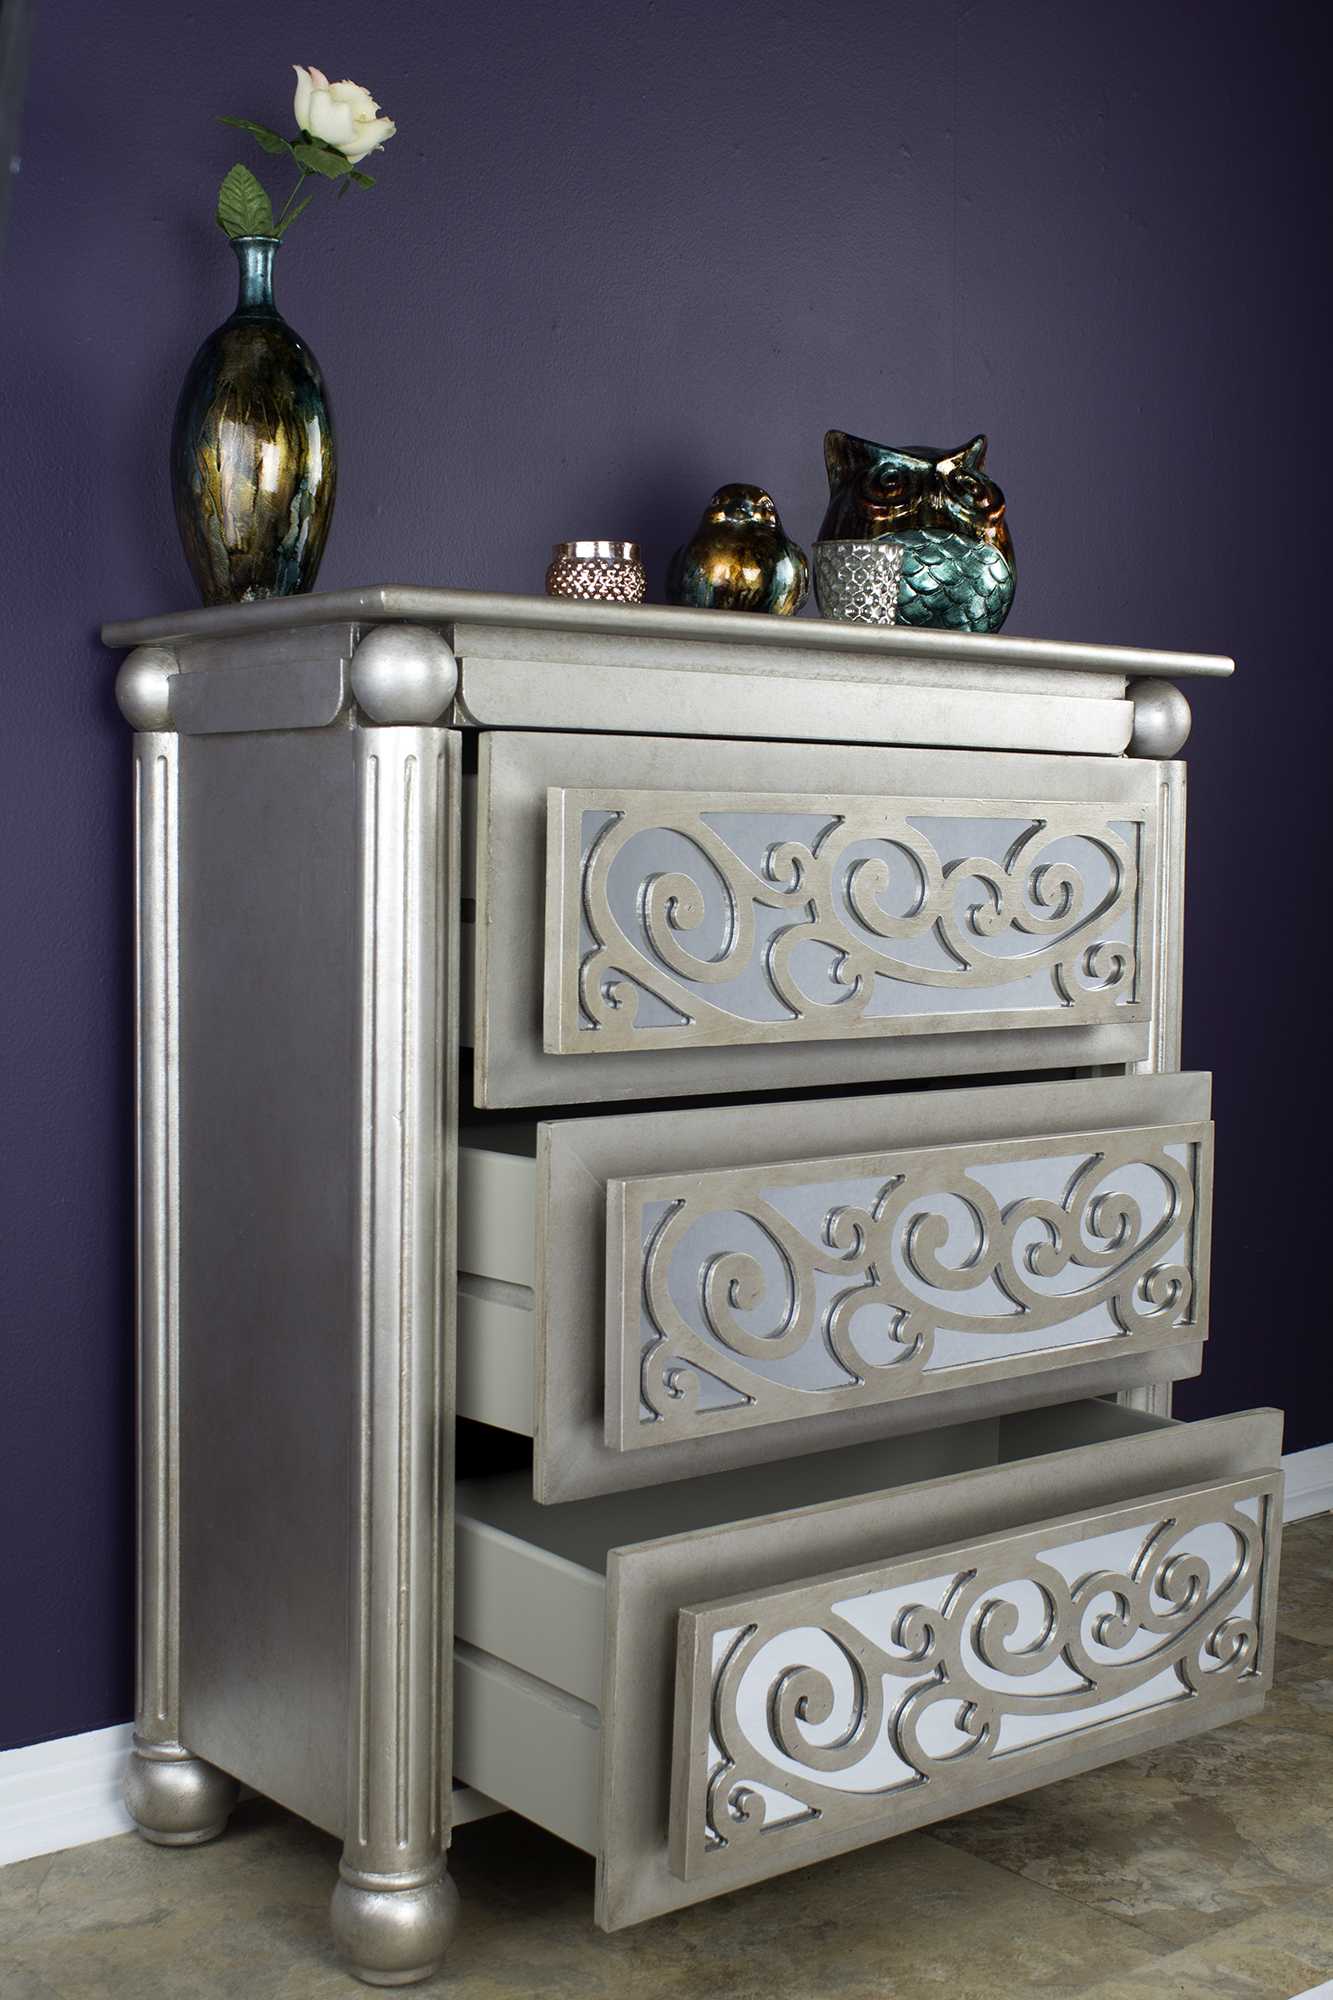 35" X 17" X 37" Antique Silver W Gold MDF Wood Mirrored Glass Accent Cabinet with drawers and Mirrored Glass